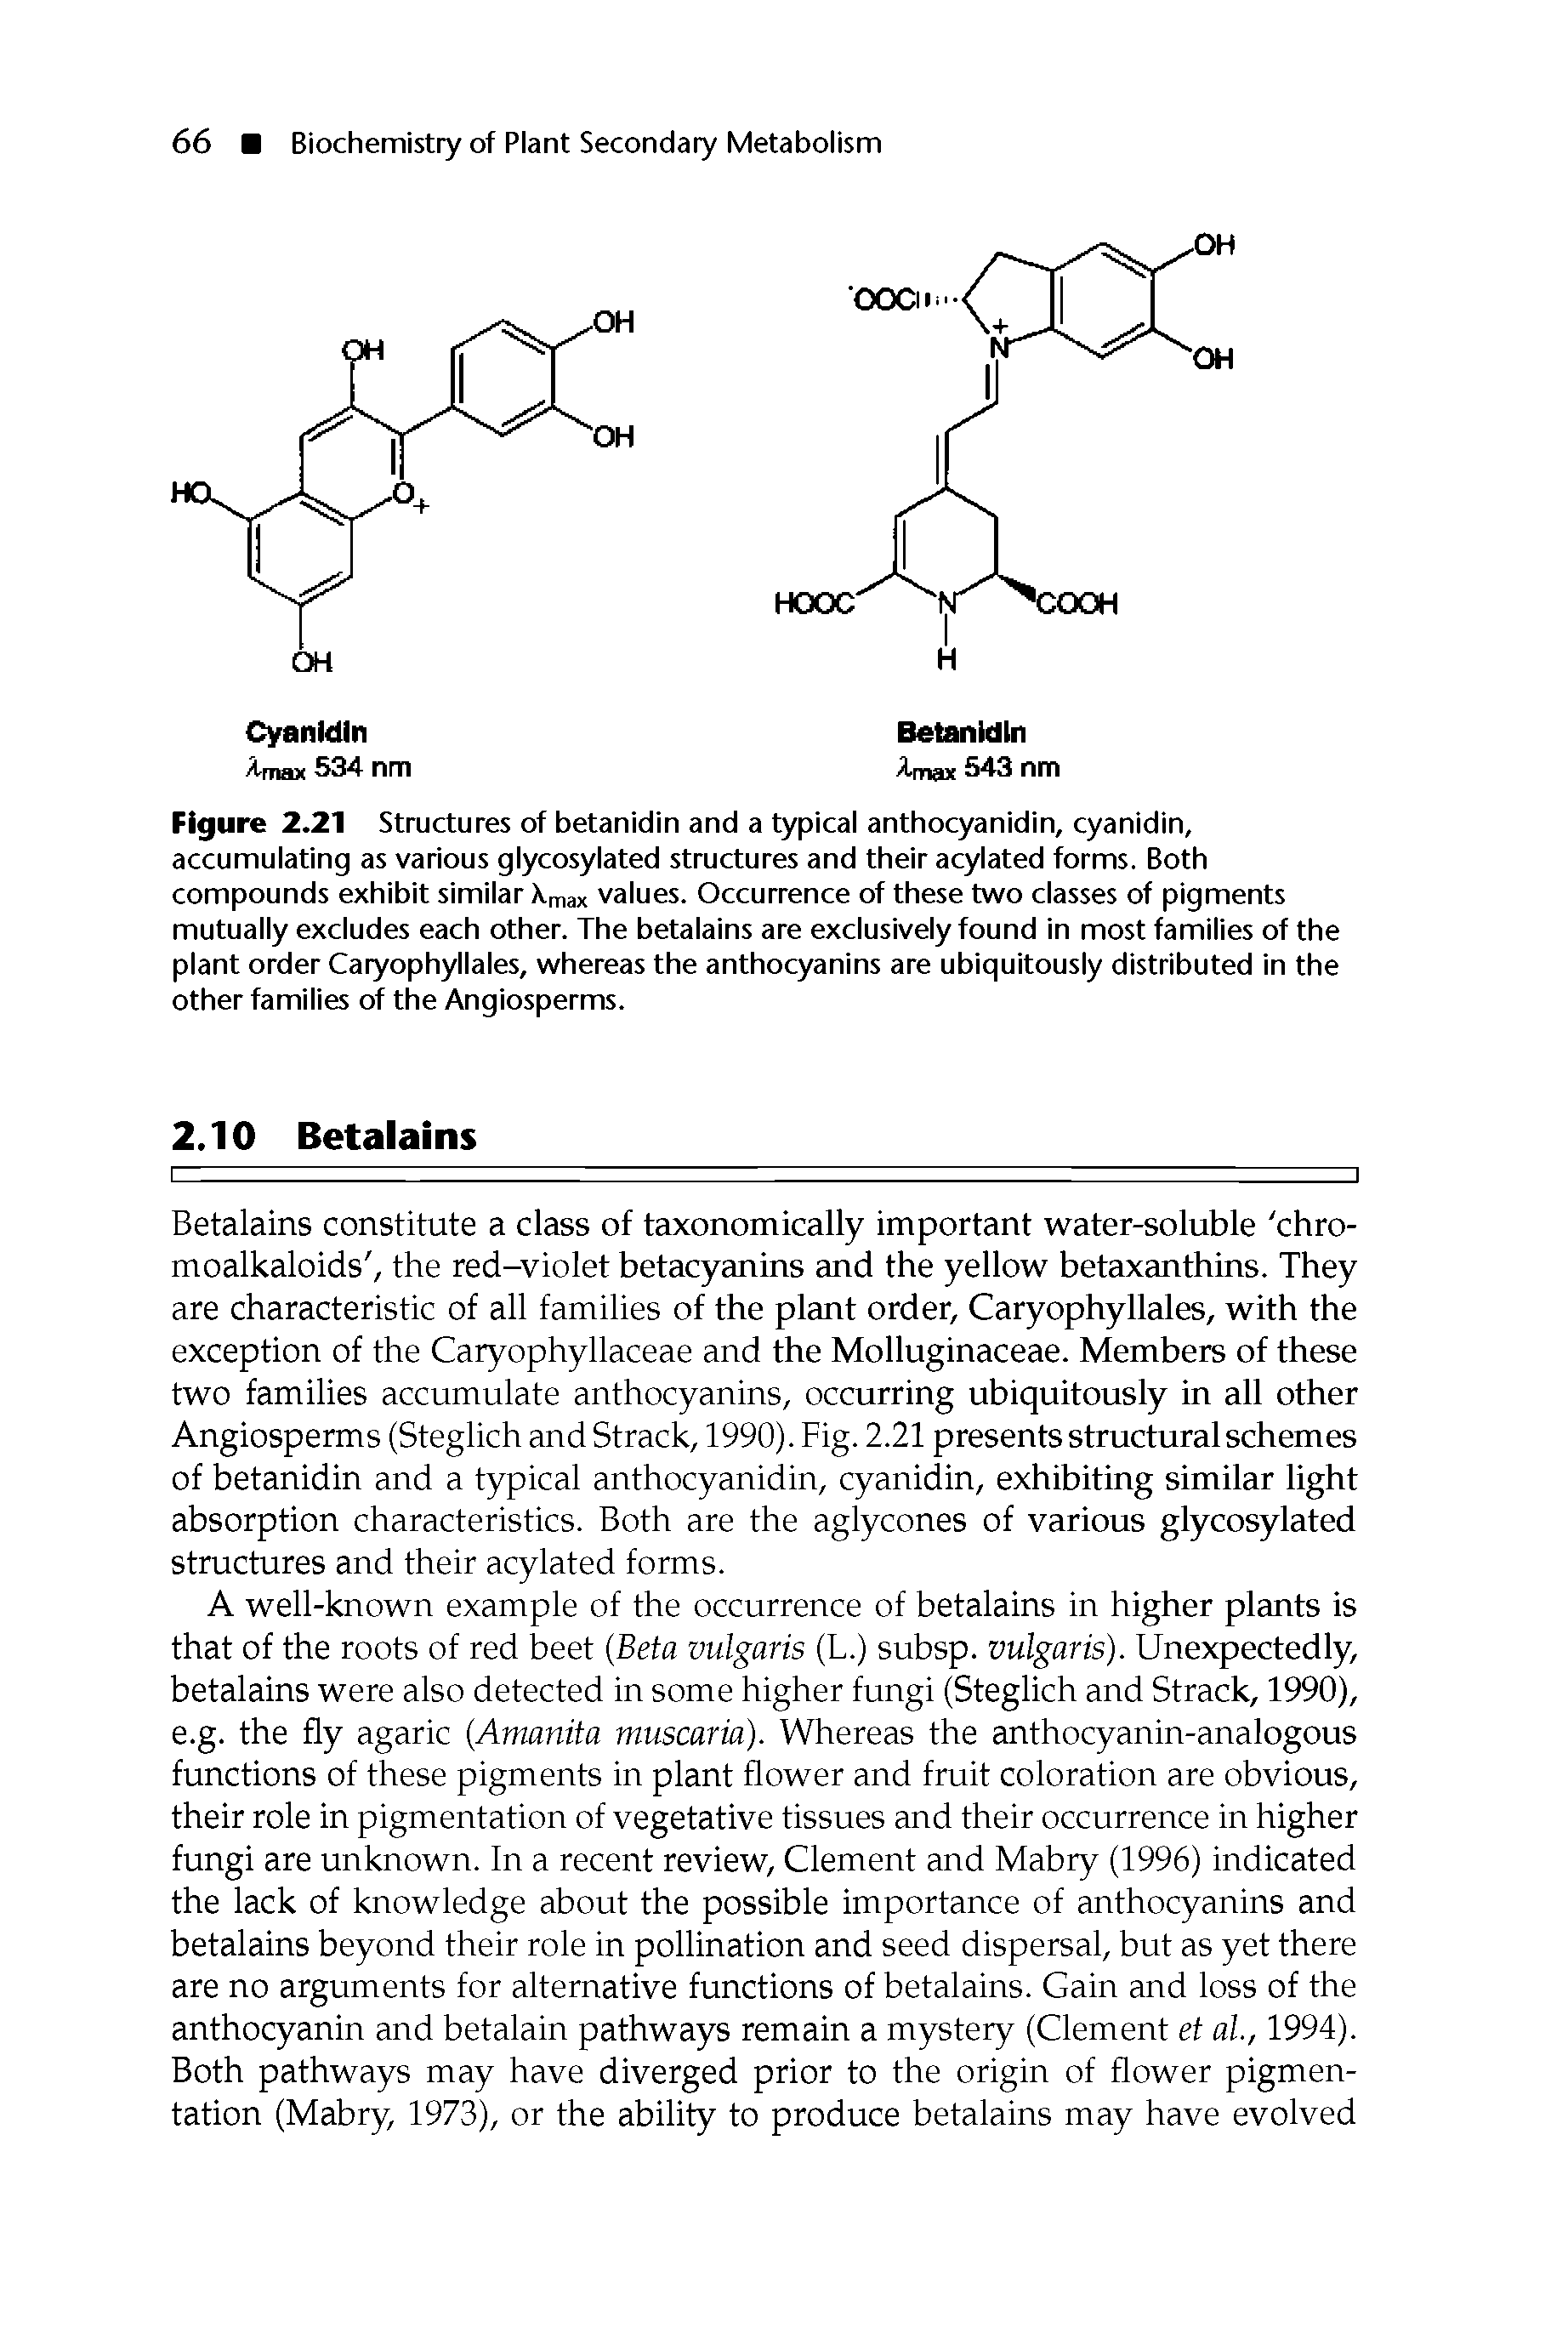 Figure 2.21 Structures of betanldln and a typical anthocyanidin, cyanidin, accumulating as various glycosylated structures and their acylated forms. Both compounds exhibit similar max values. Occurrence of these two classes of pigments mutually excludes each other. The betalains are exclusively found in most families of the plant order Caryophyllales, whereas the anthocyanins are ubiquitously distributed in the other families of the Angiosperms.